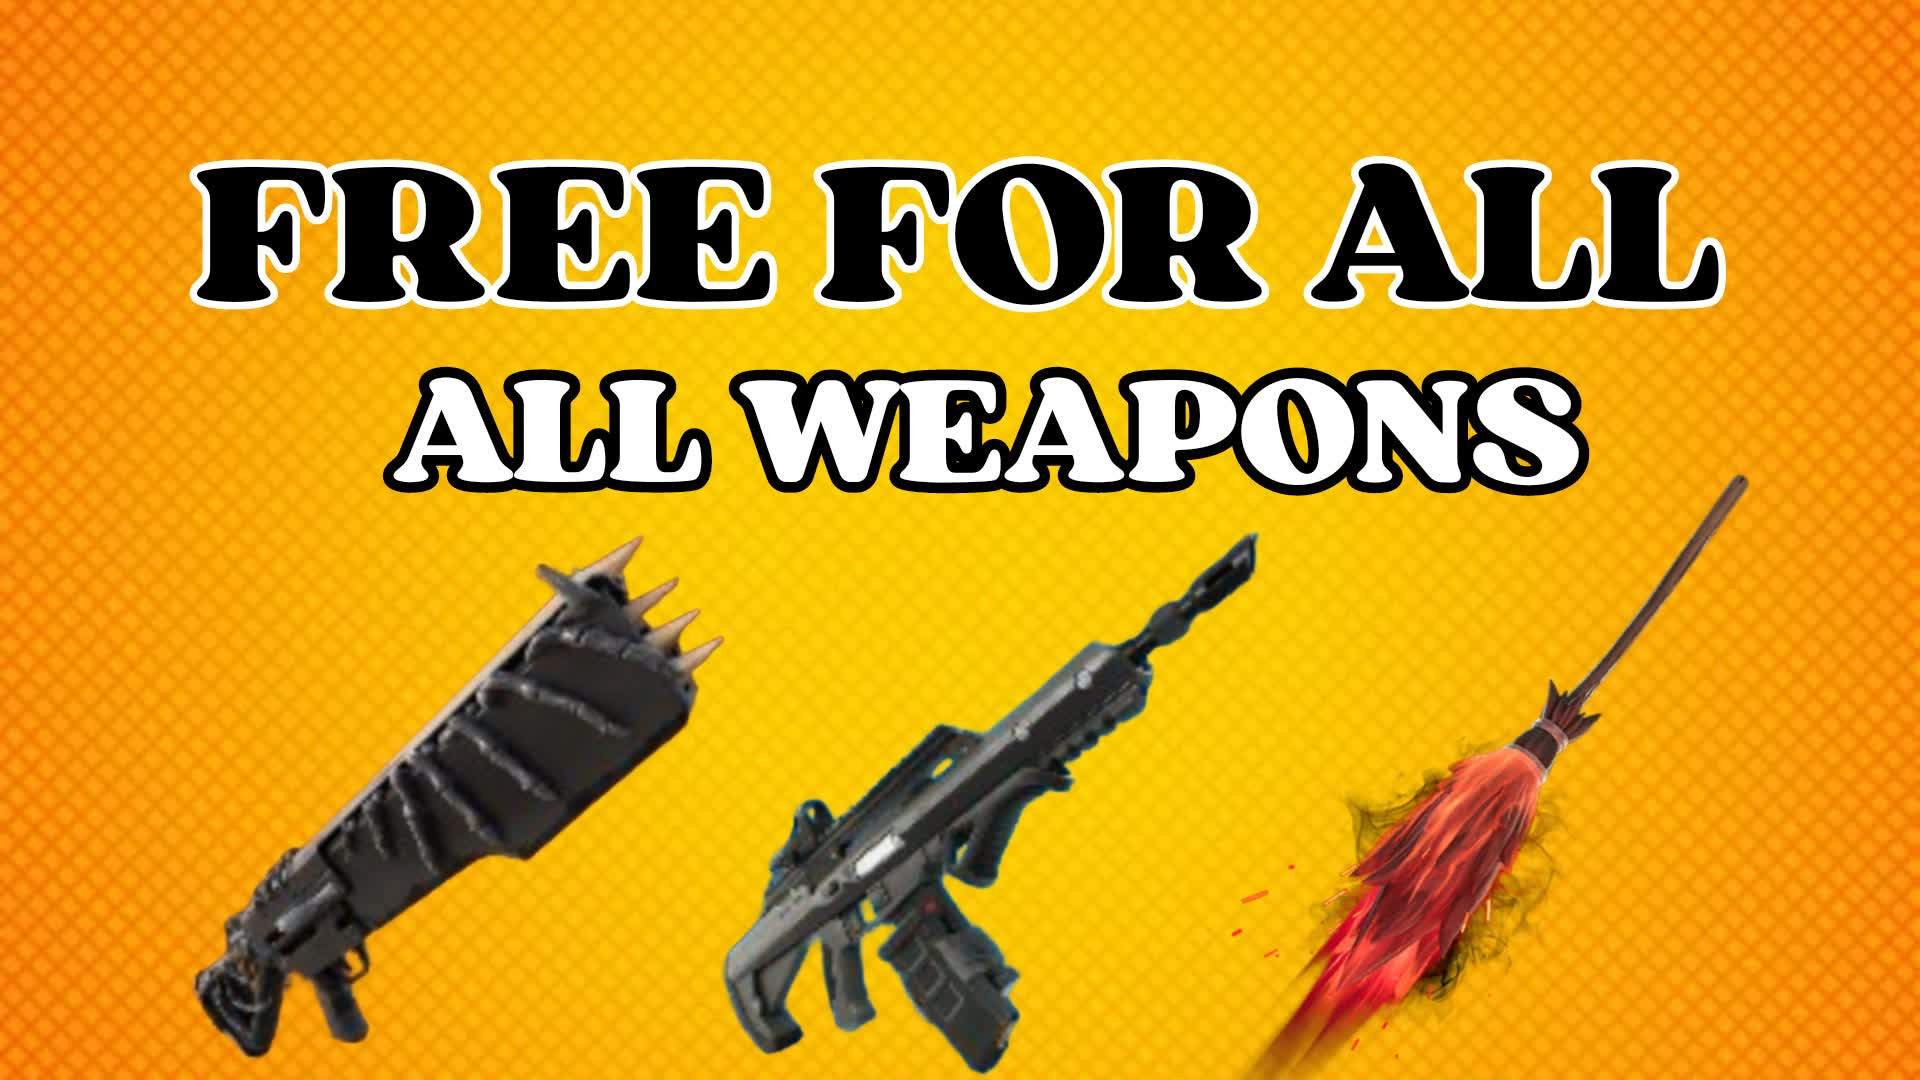 FREE FOR ALL - ALL WEAPON